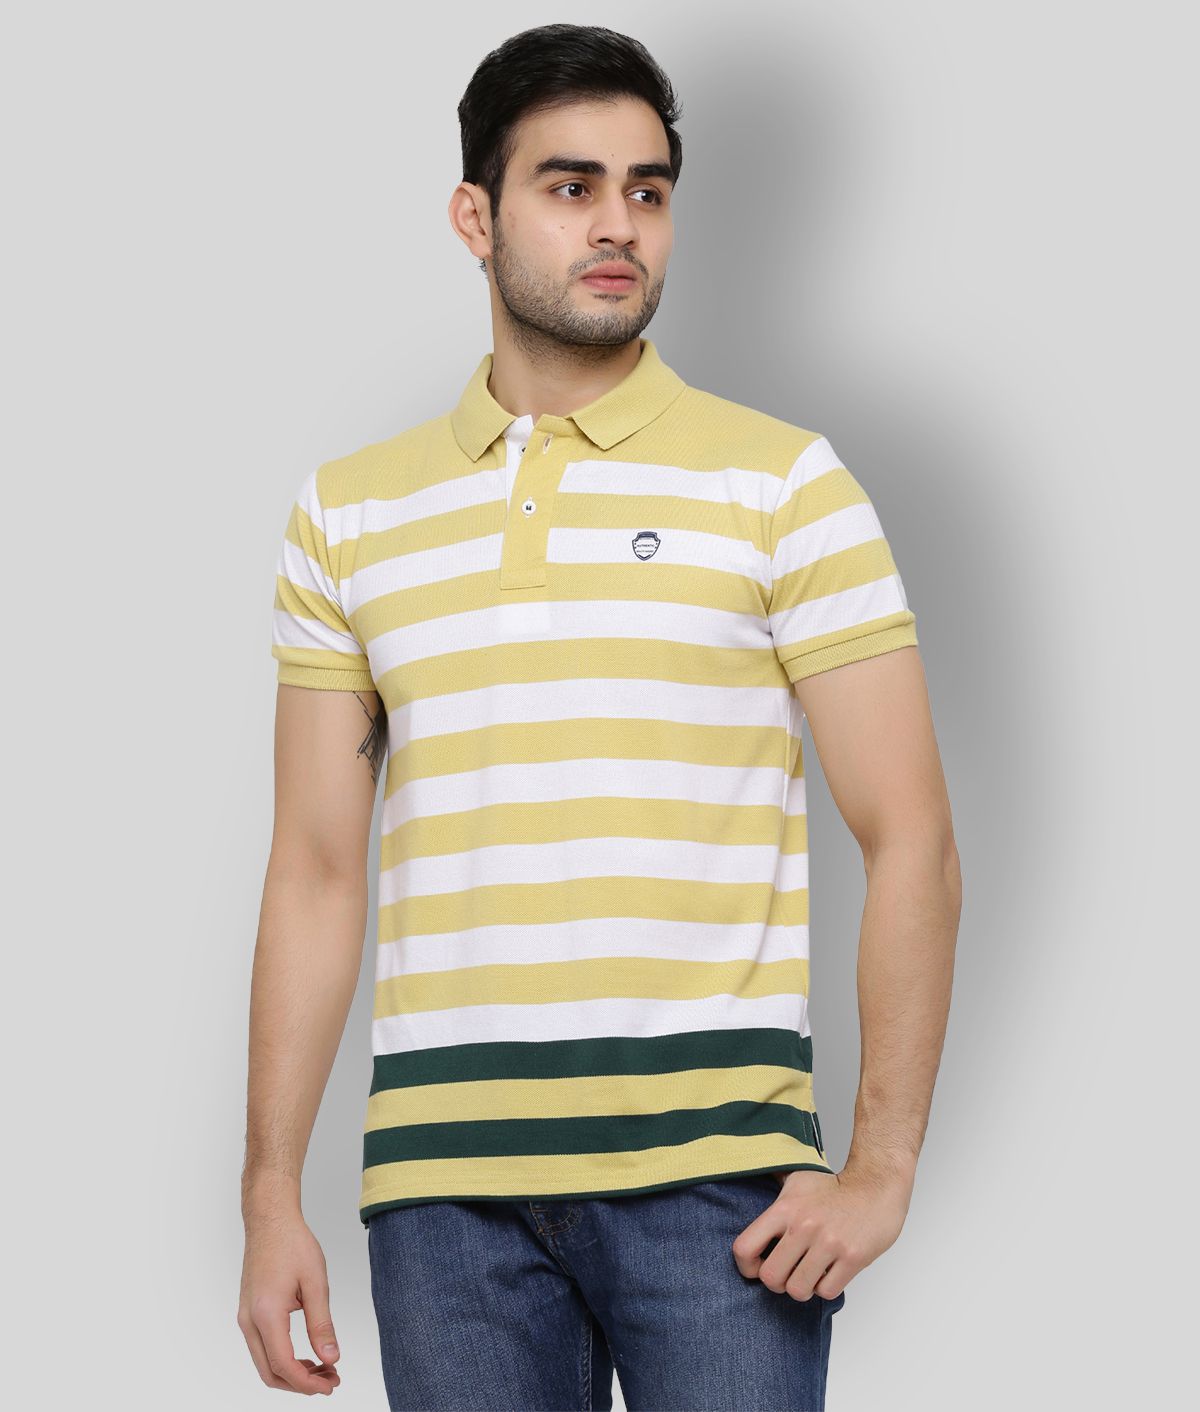     			GENTINO - Yellow Cotton Blend Regular Fit Men's Polo T Shirt ( Pack of 1 )